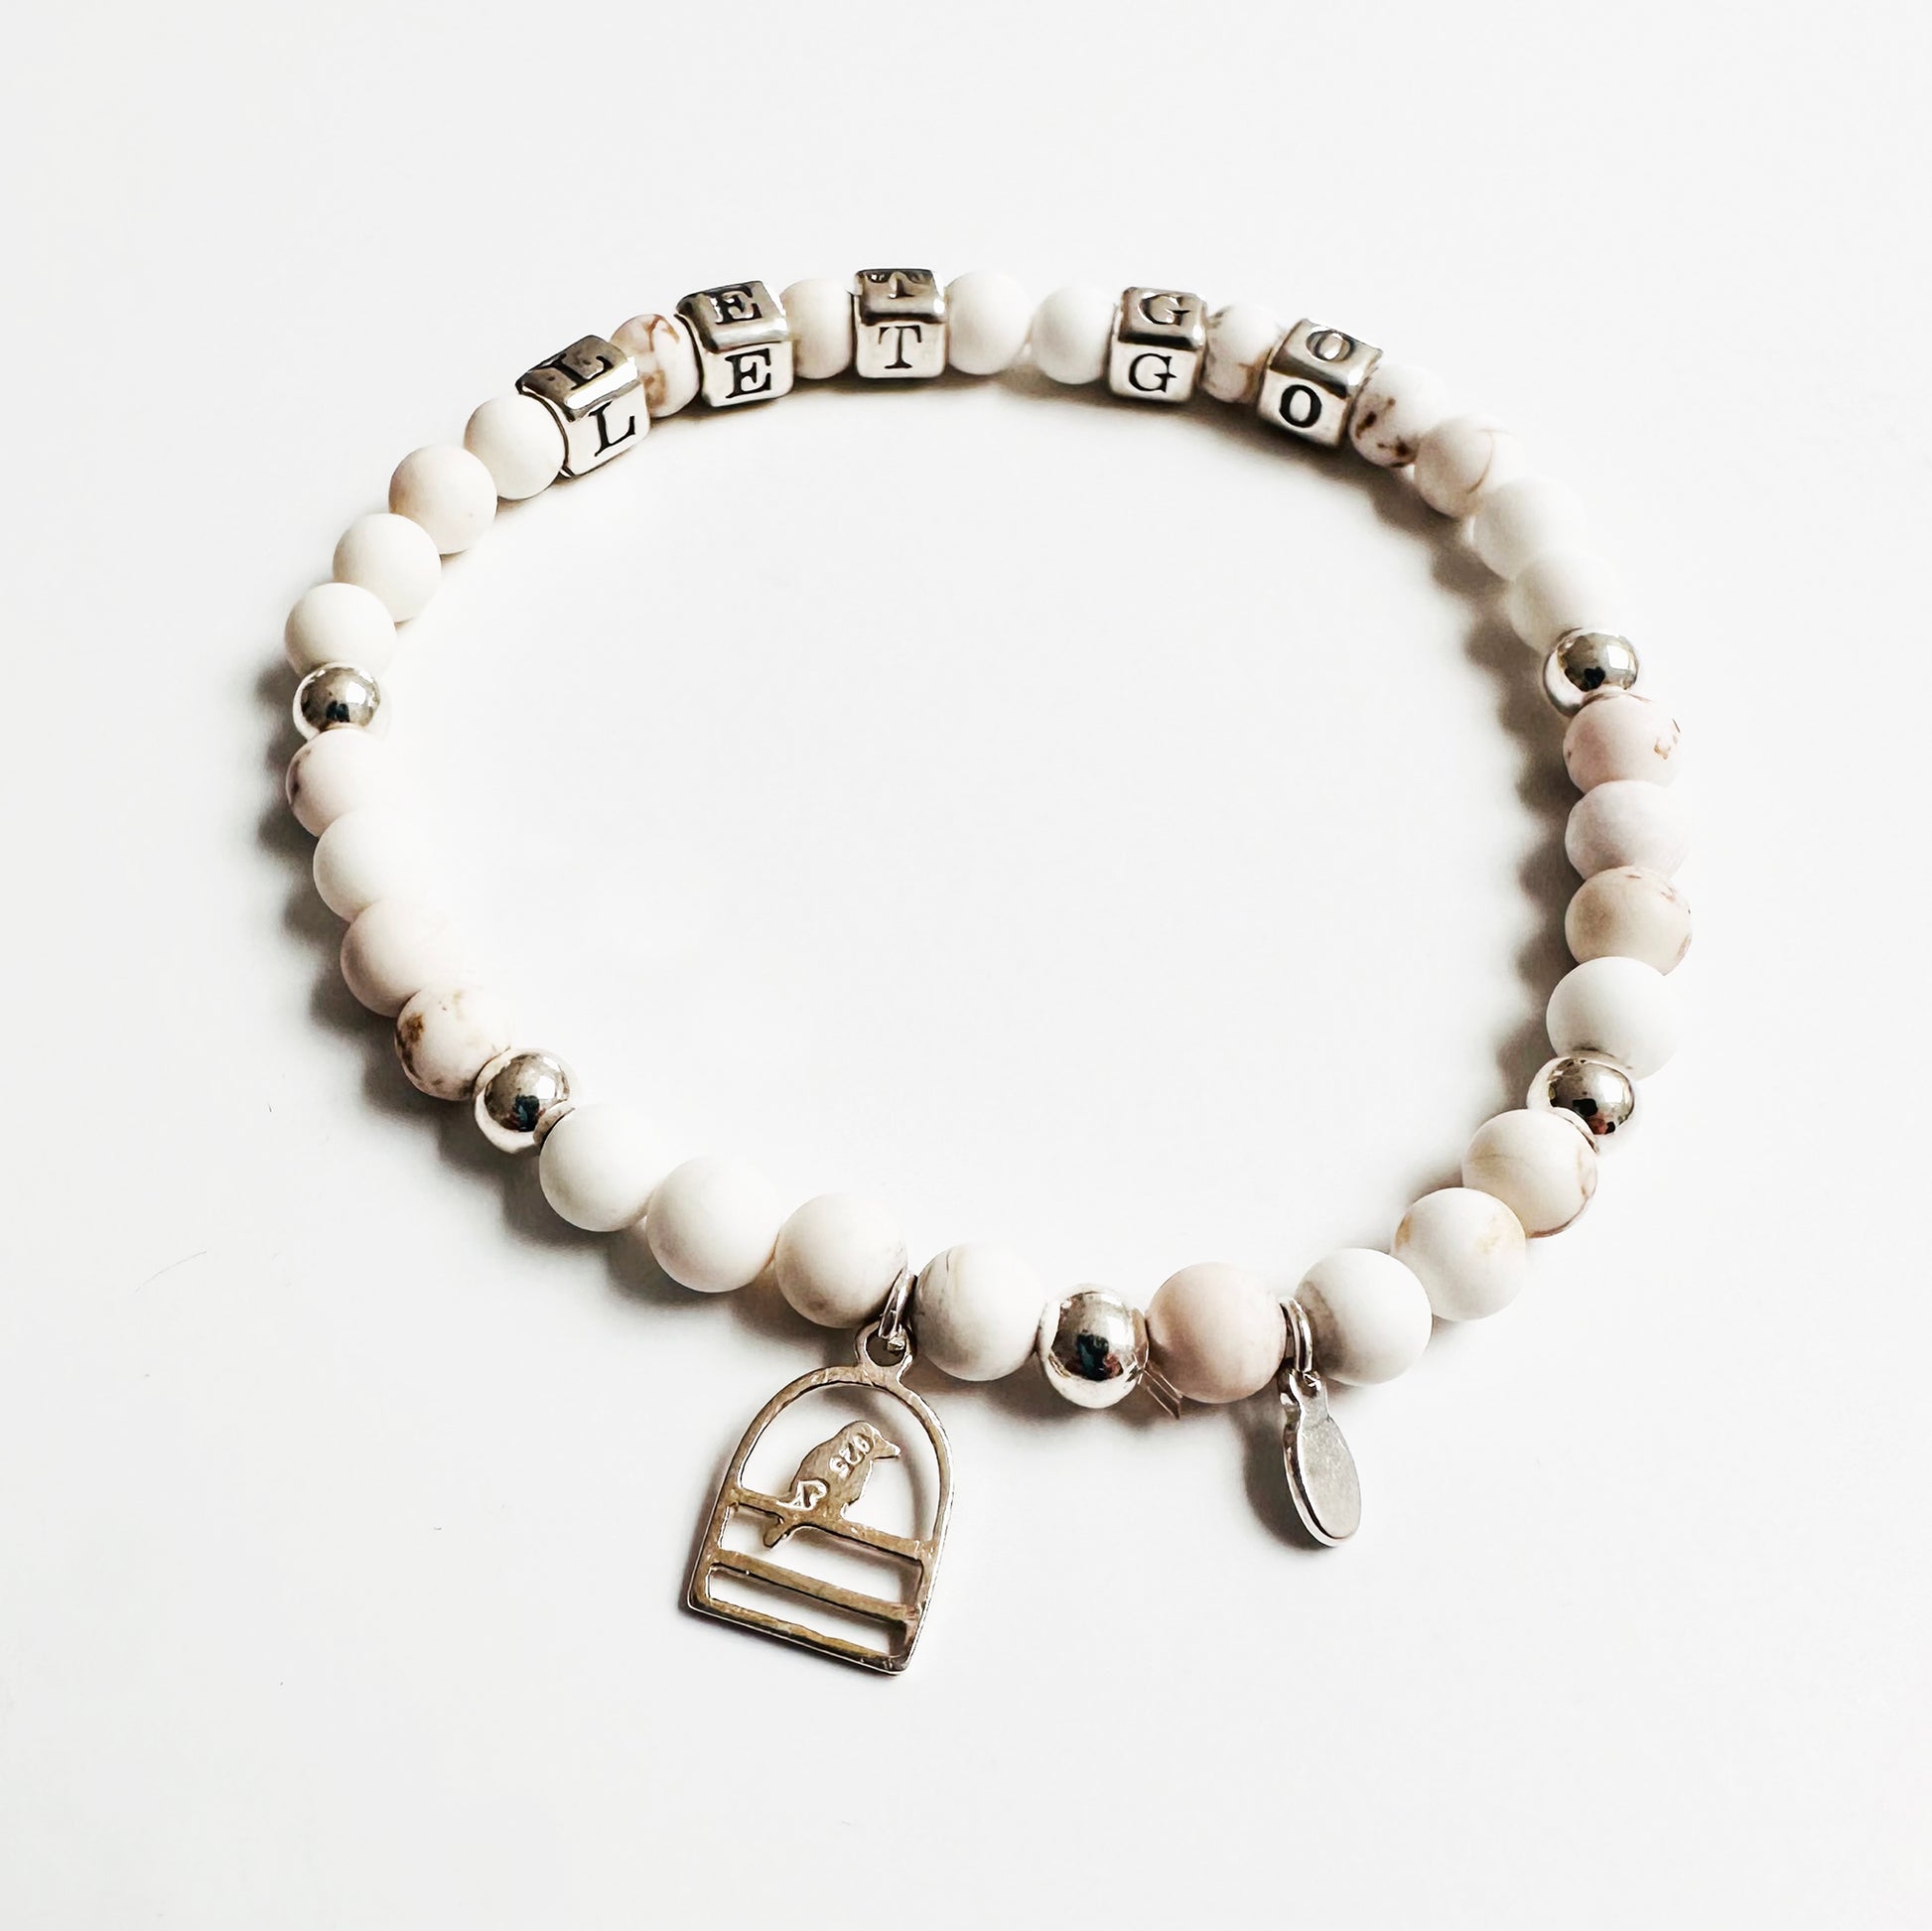 Let Go stretch bracelet in sterling silver and white howlite beads, showing sterling silver bird charm